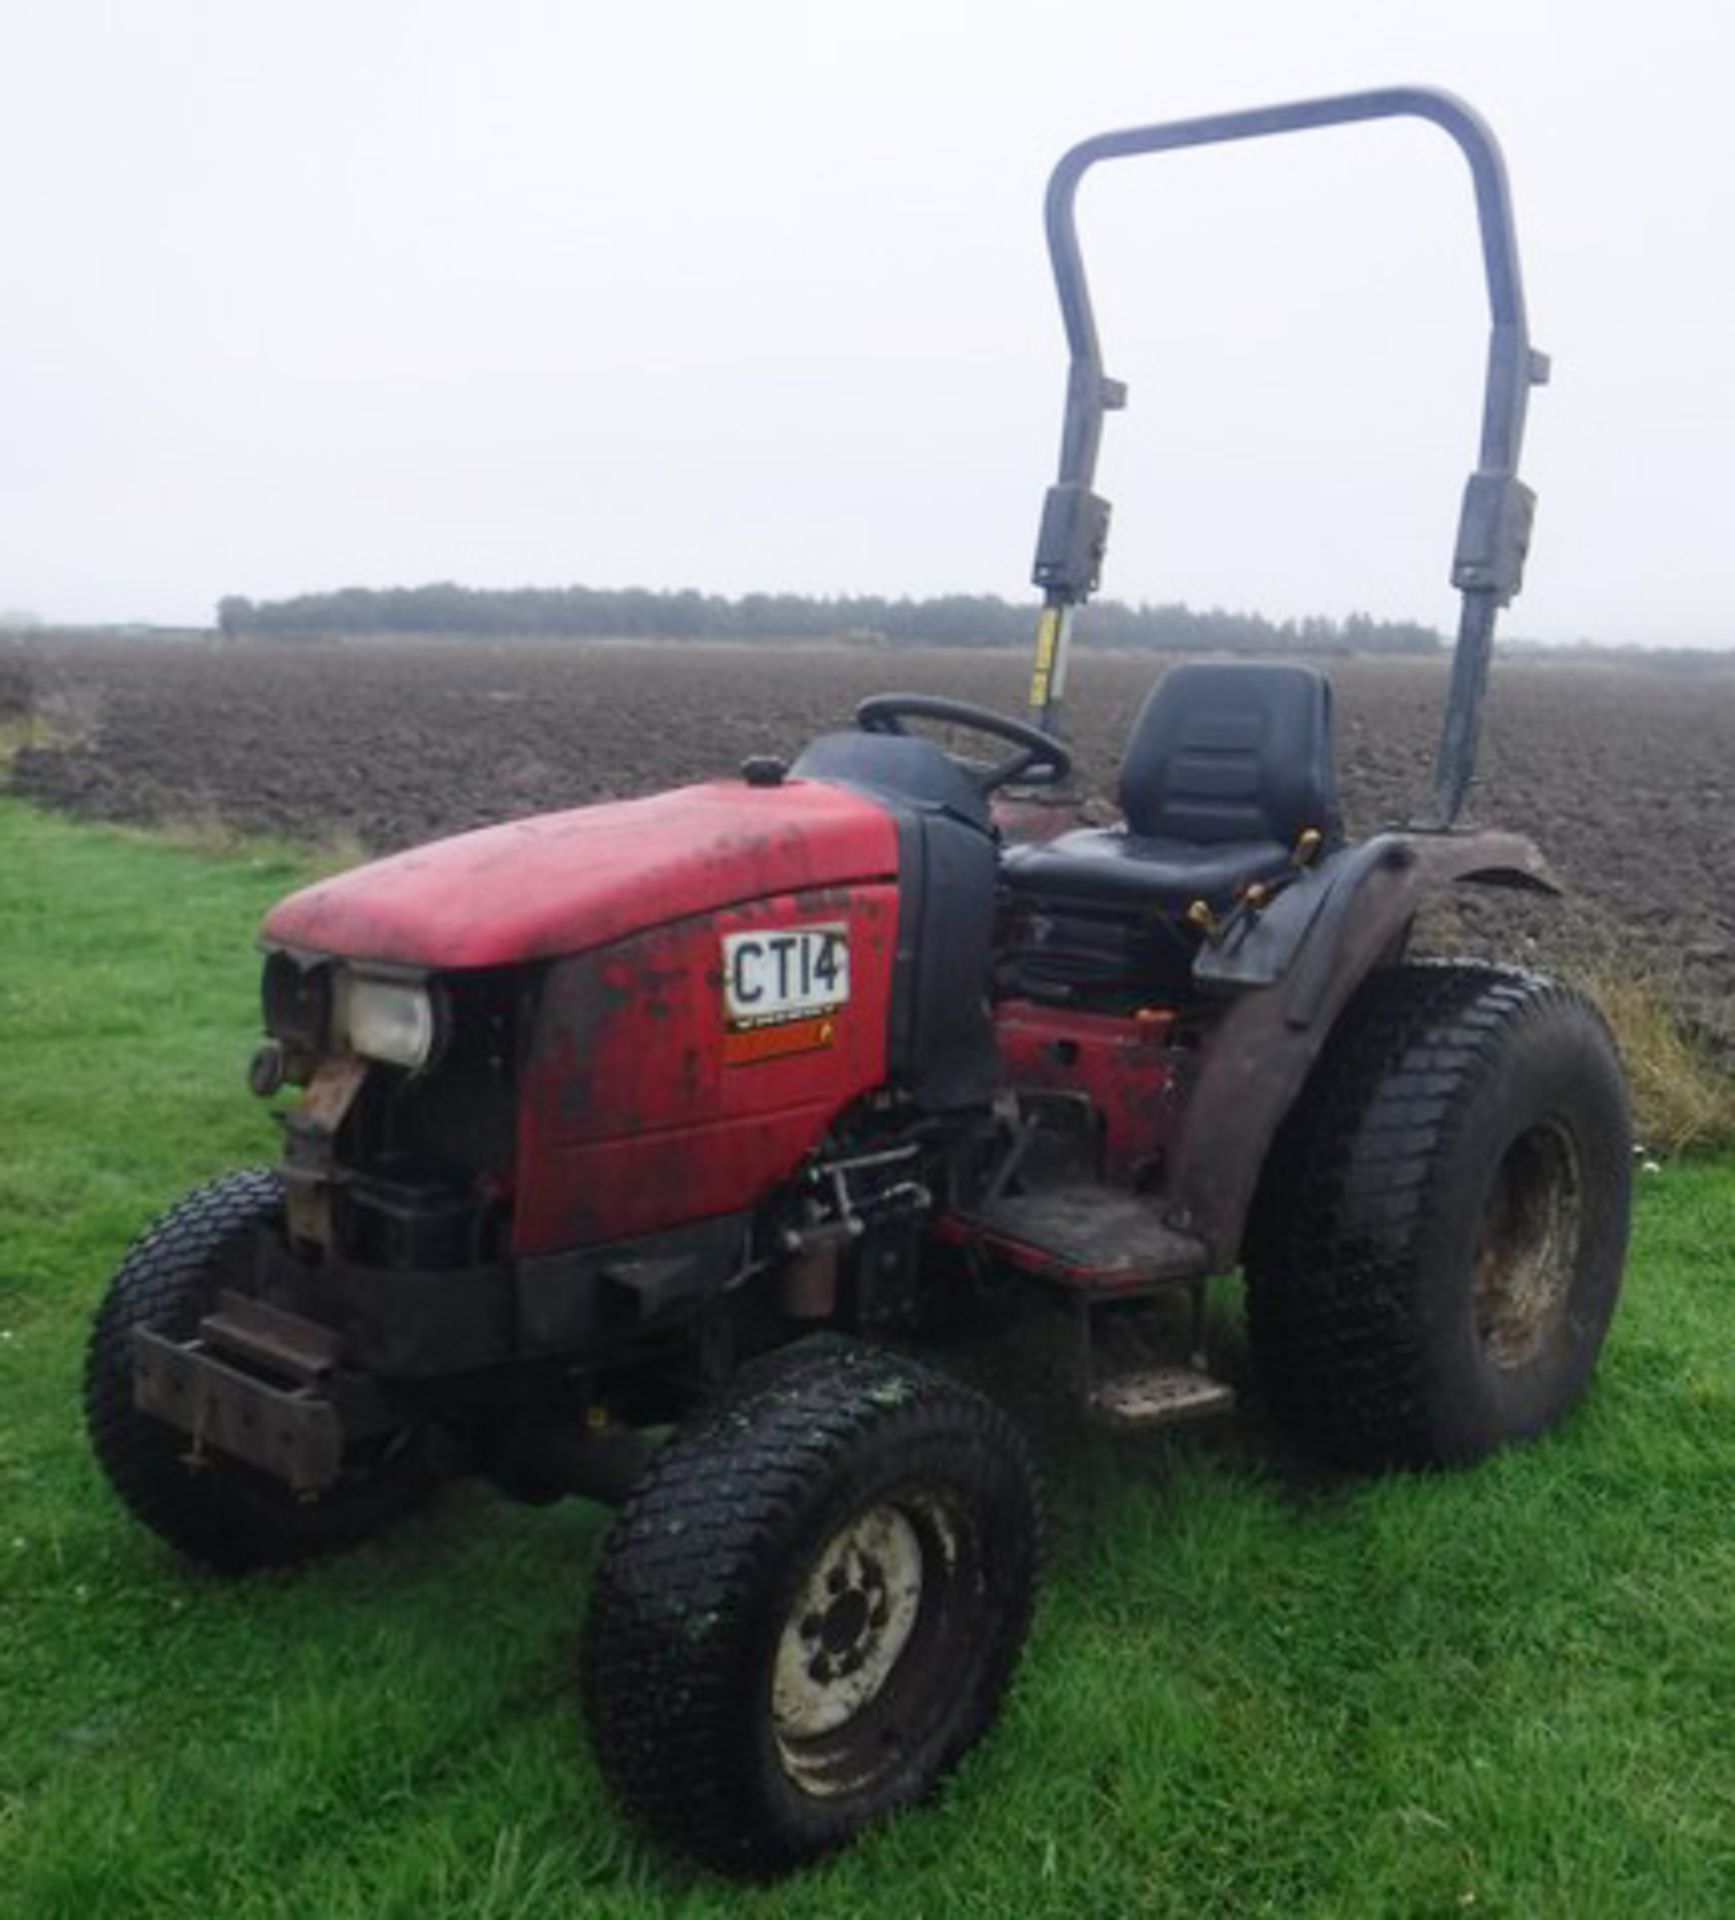 2010 SHIBAURA ST-333 compact tractor. S/N 21131, 2147hrs (not verified)